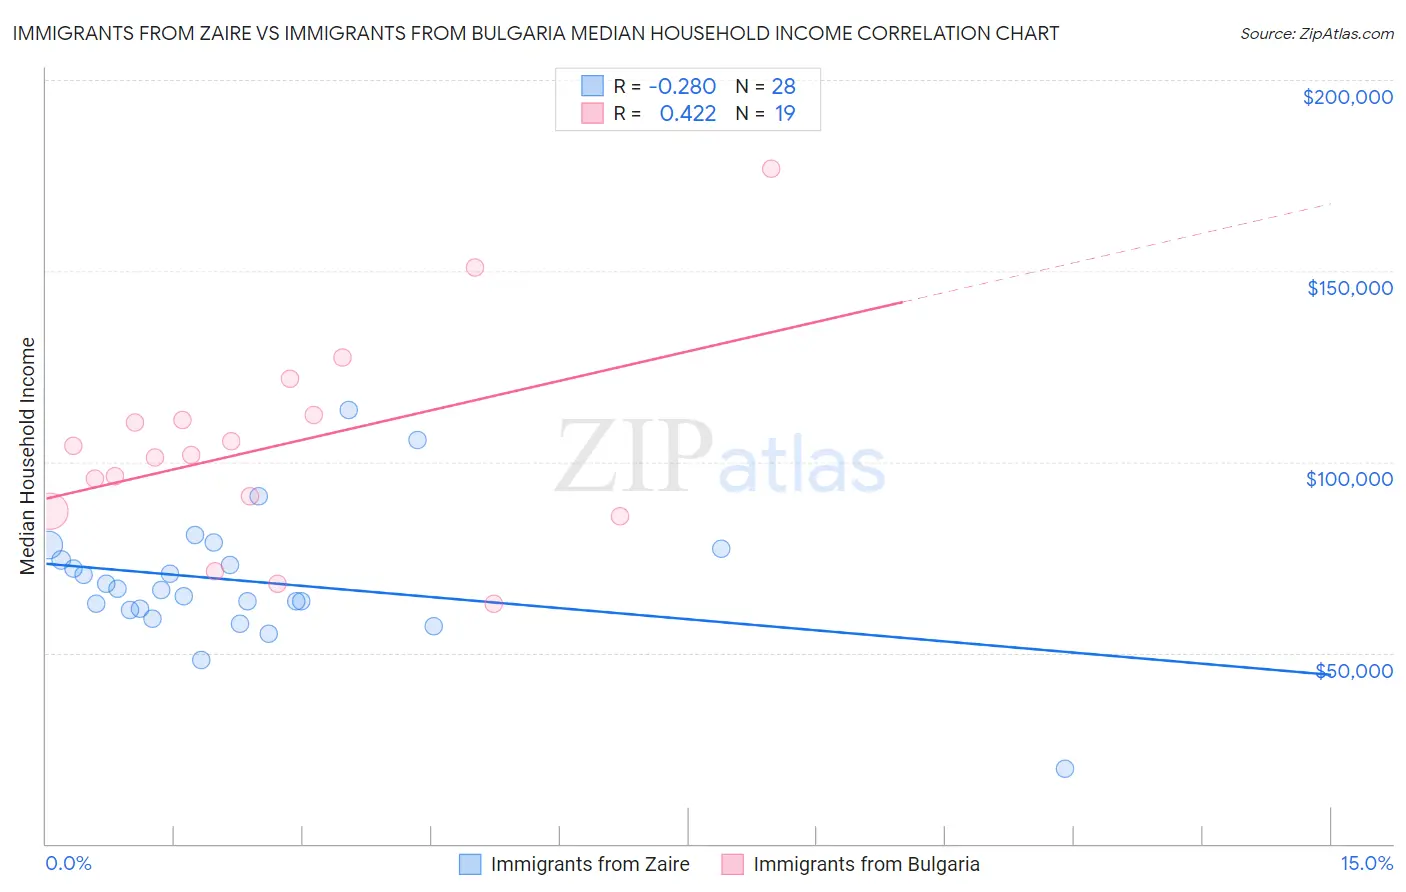 Immigrants from Zaire vs Immigrants from Bulgaria Median Household Income